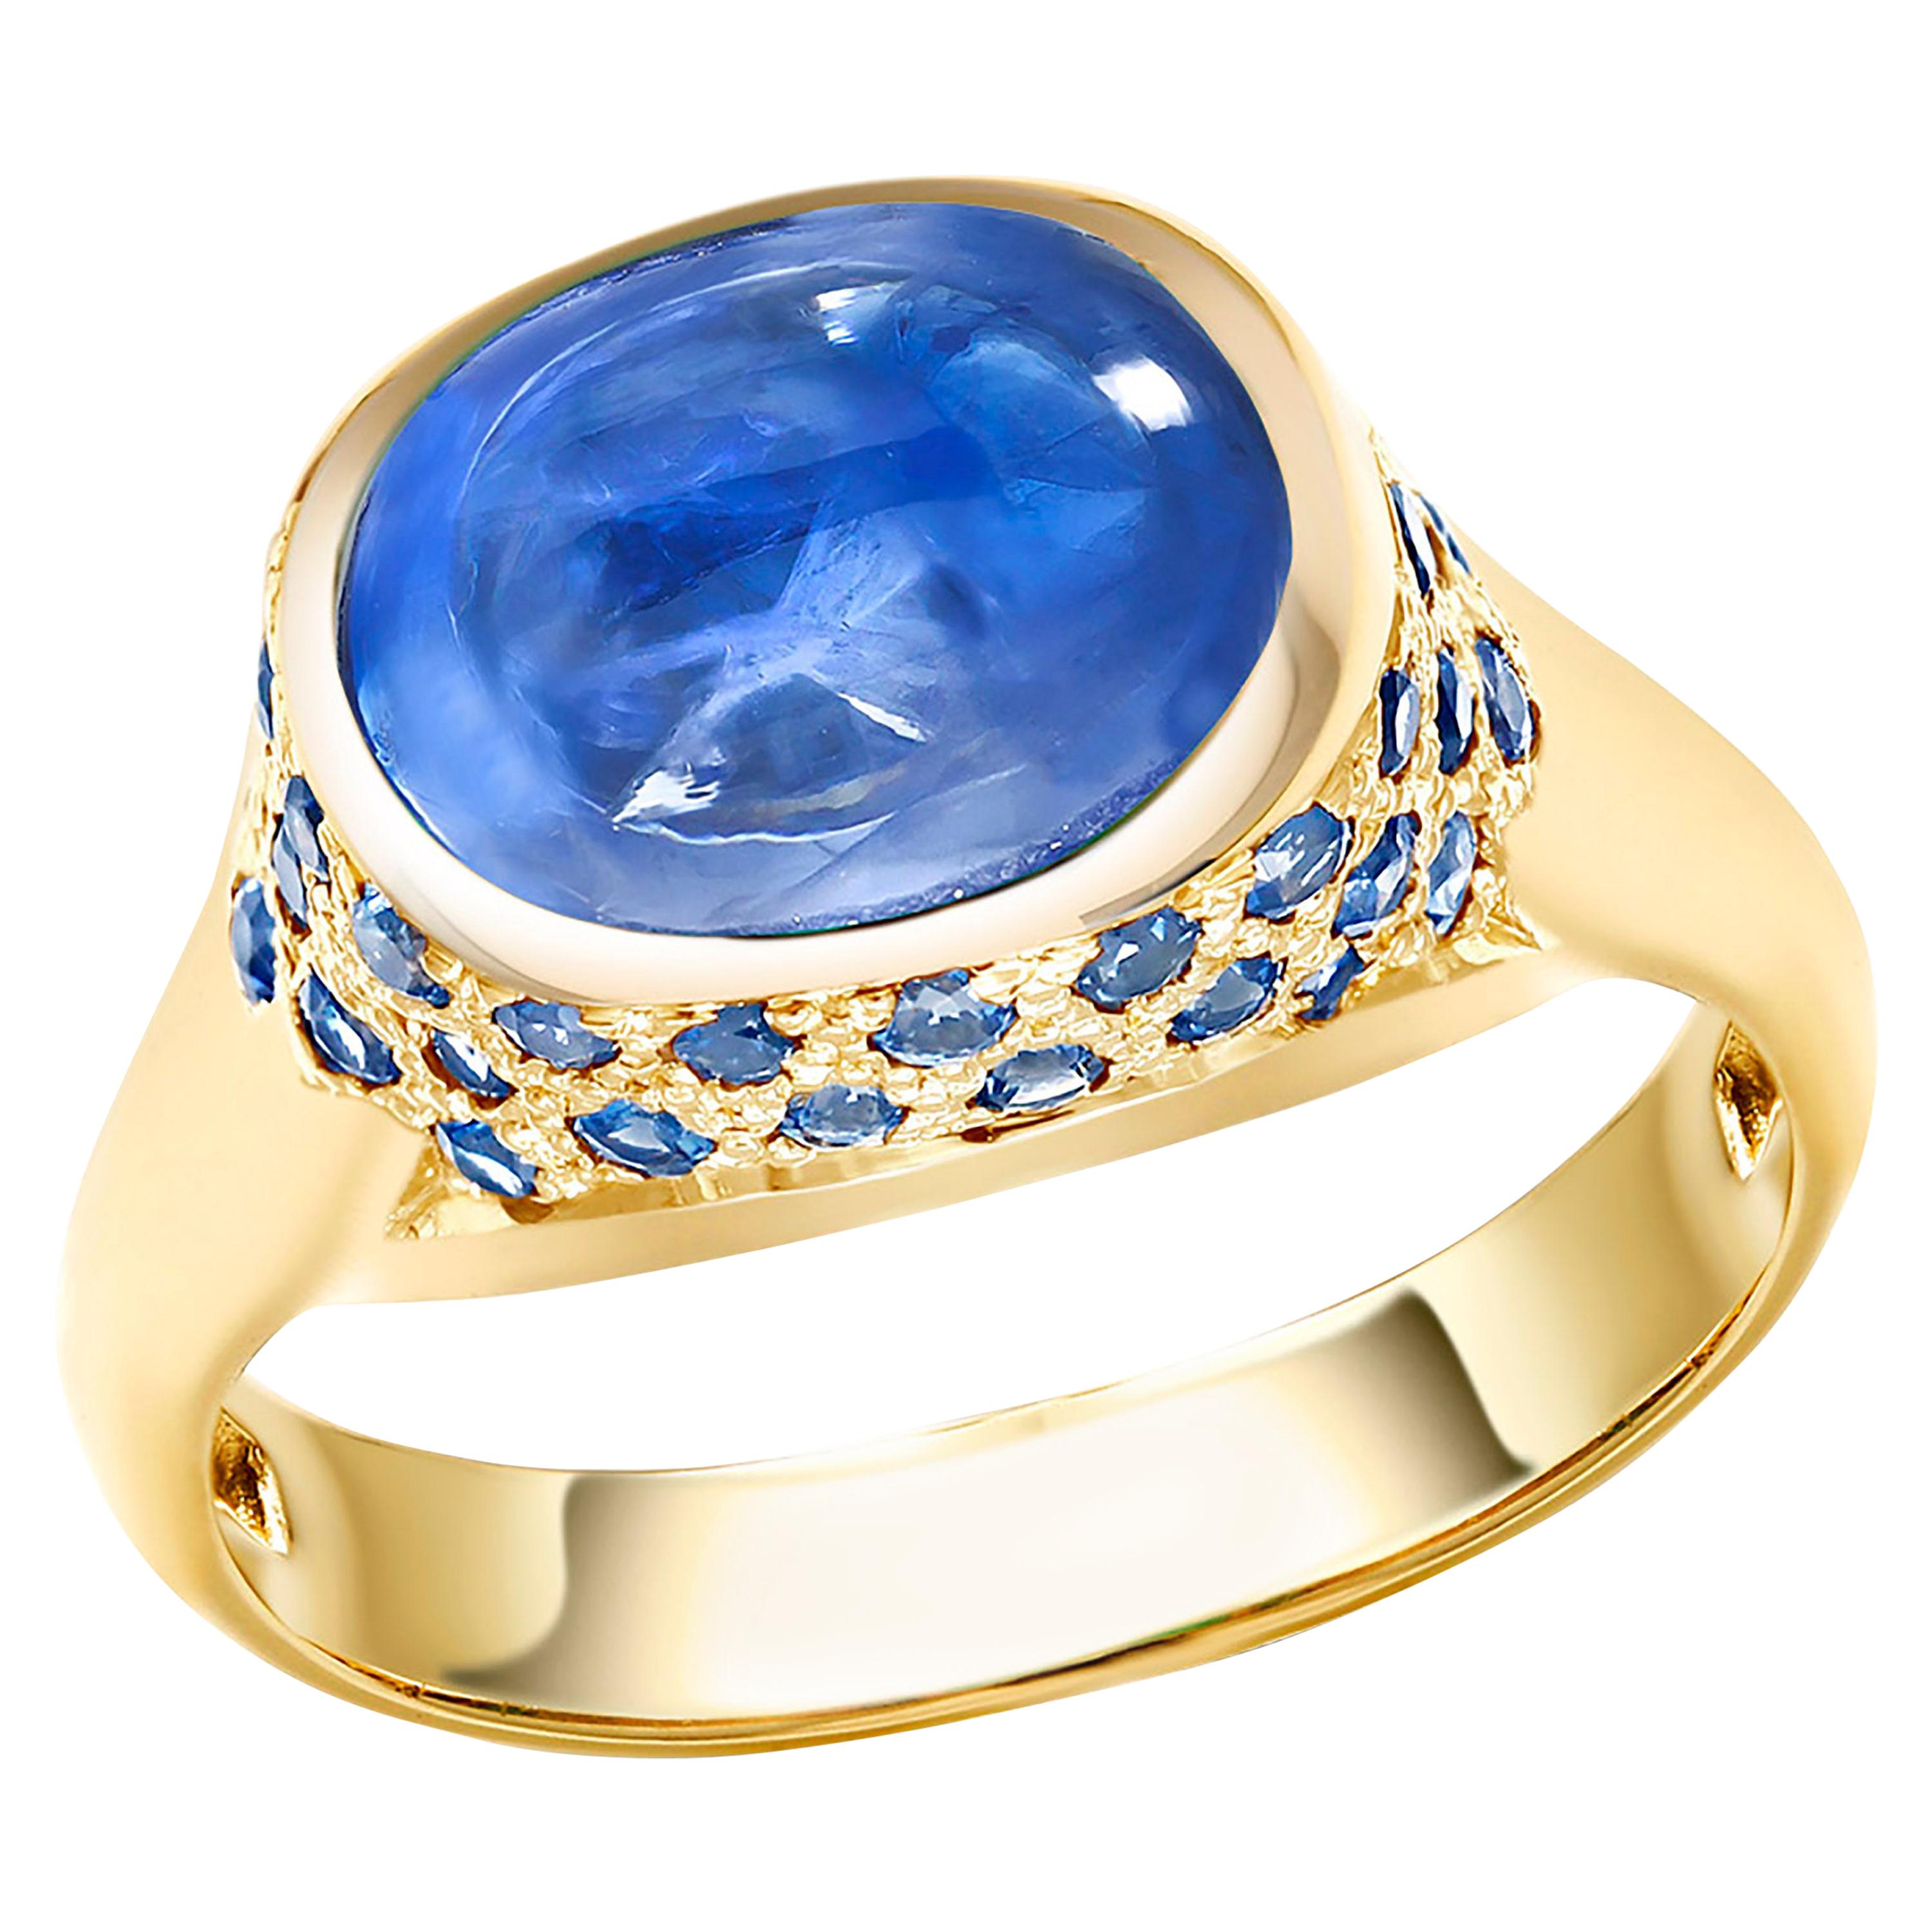 Ceylon Cabochon Sapphire Dome Yellow Gold Cocktail Ring Weighing 3.09 Carat 